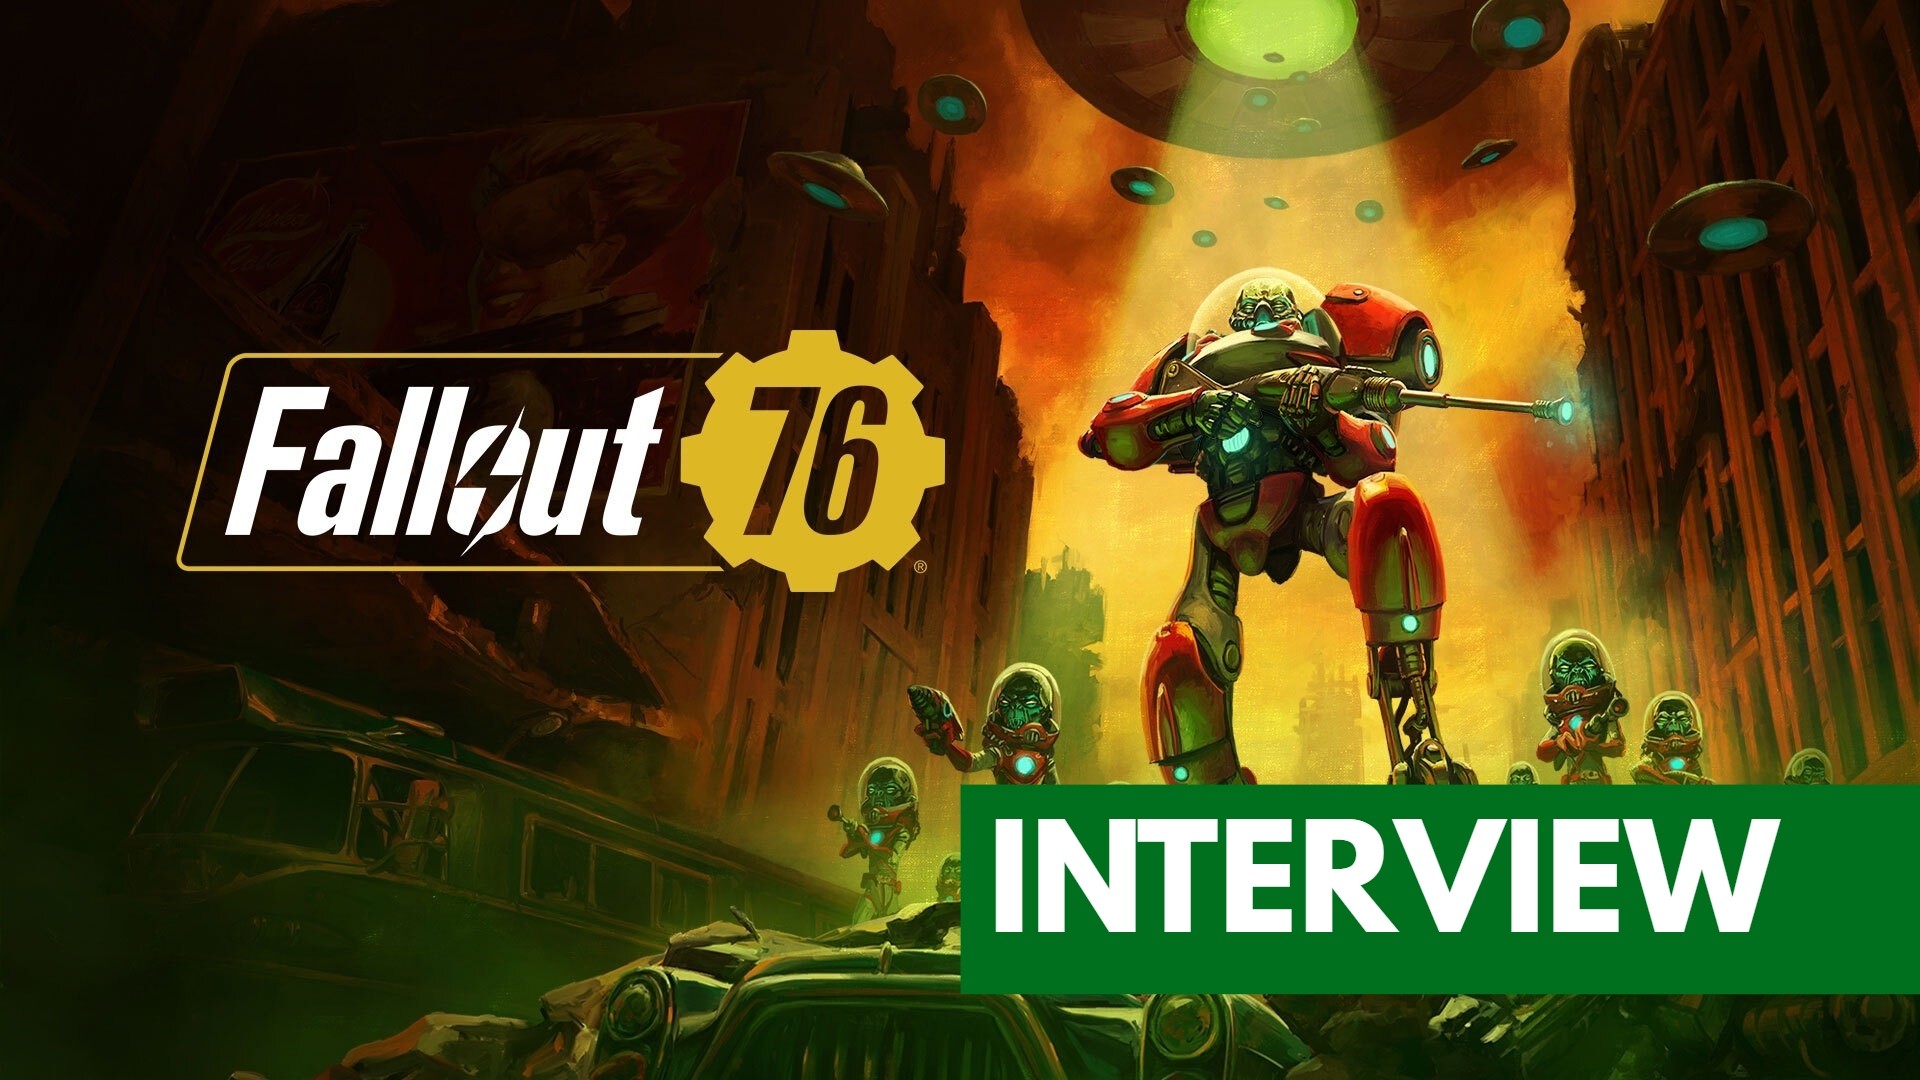 Fallout 76 Interview 2022 Roadmap, The Pitt, Aliens, and Nuka World